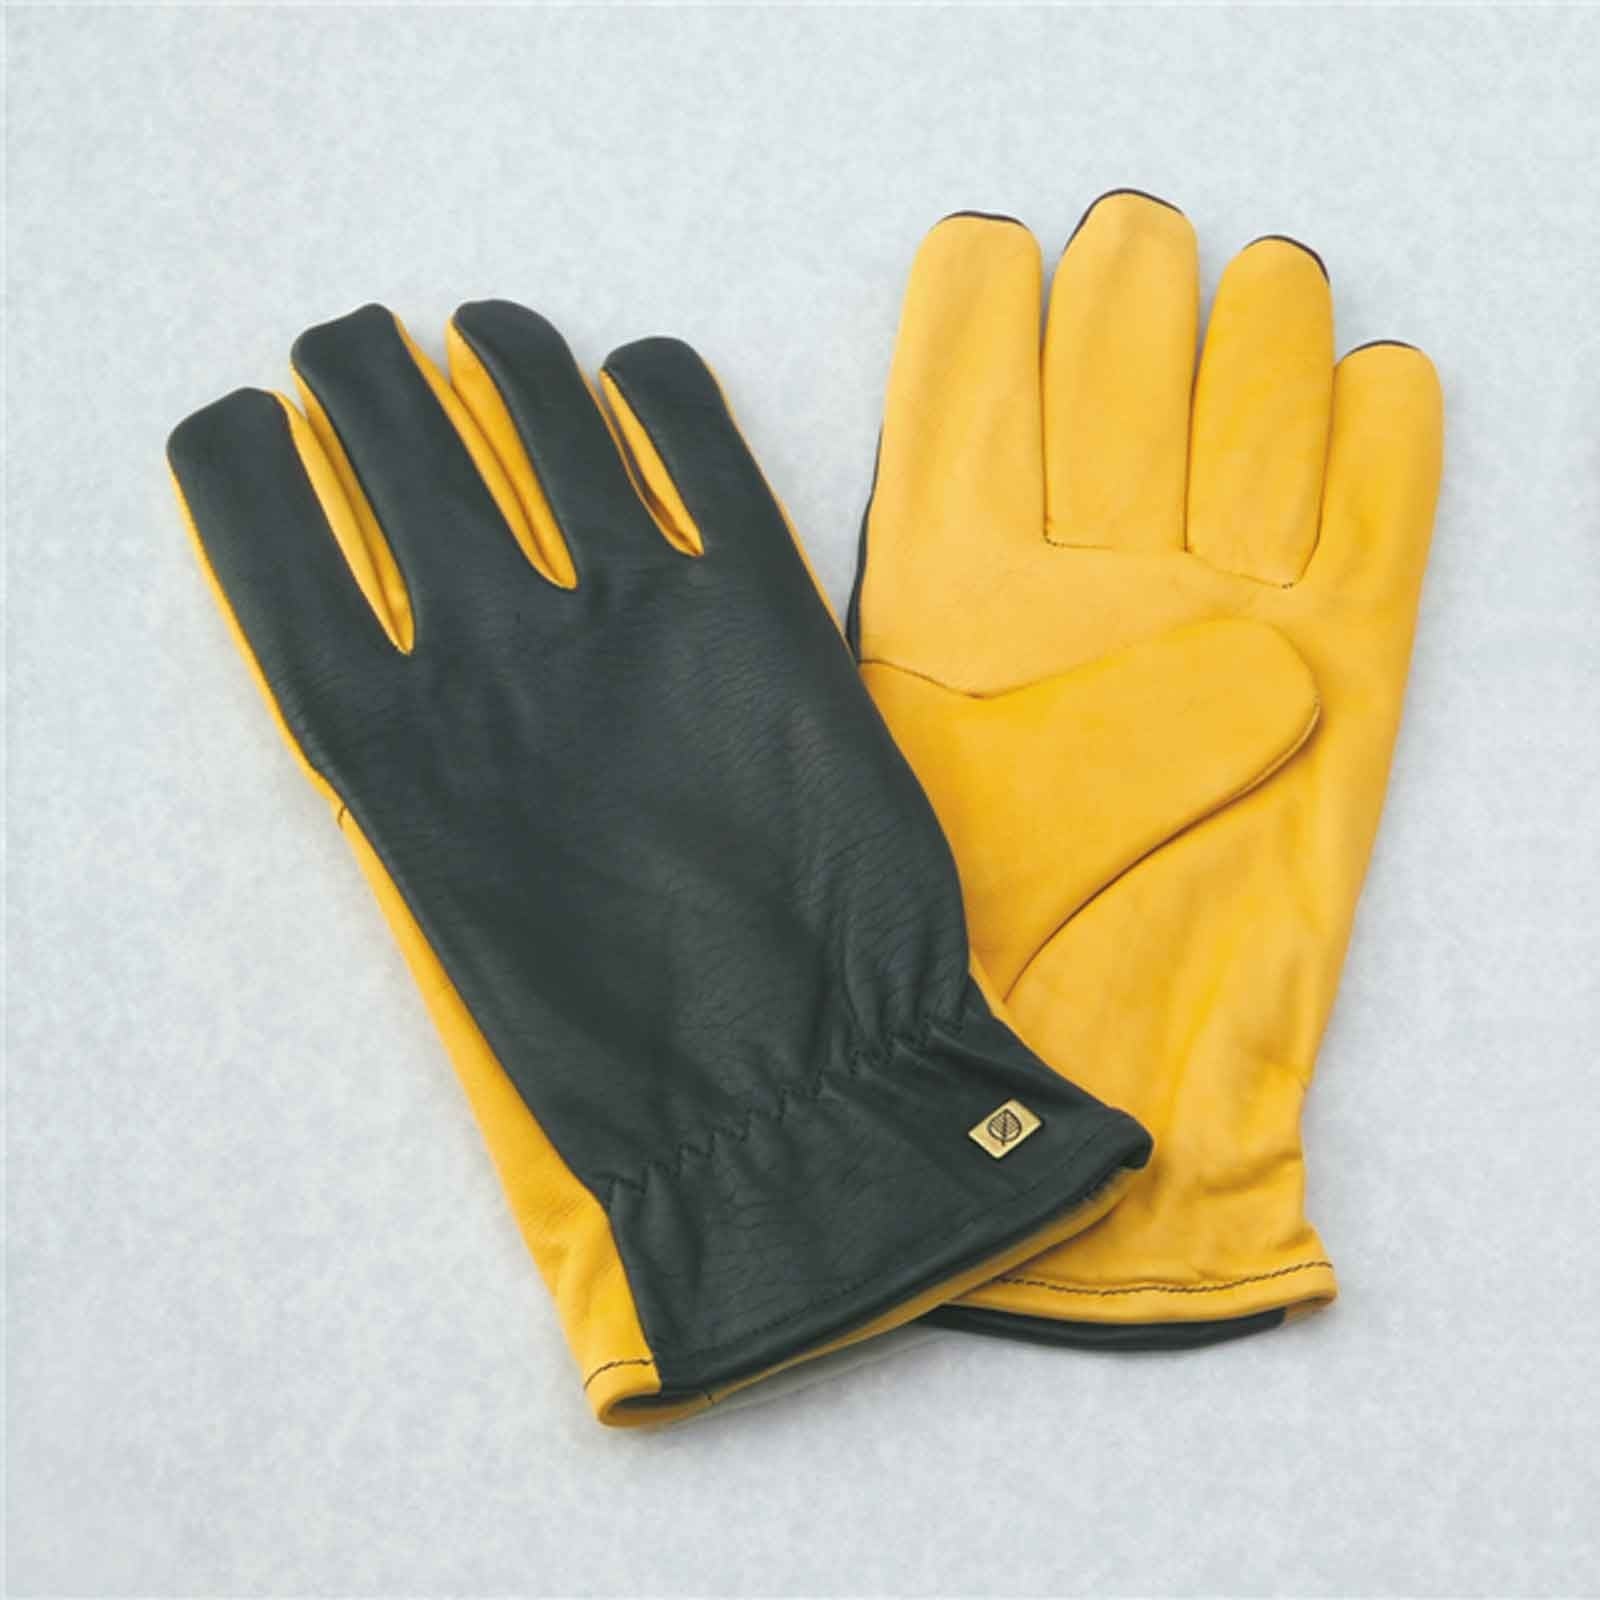 Gents Gold Leaf Dry Touch Gloves 